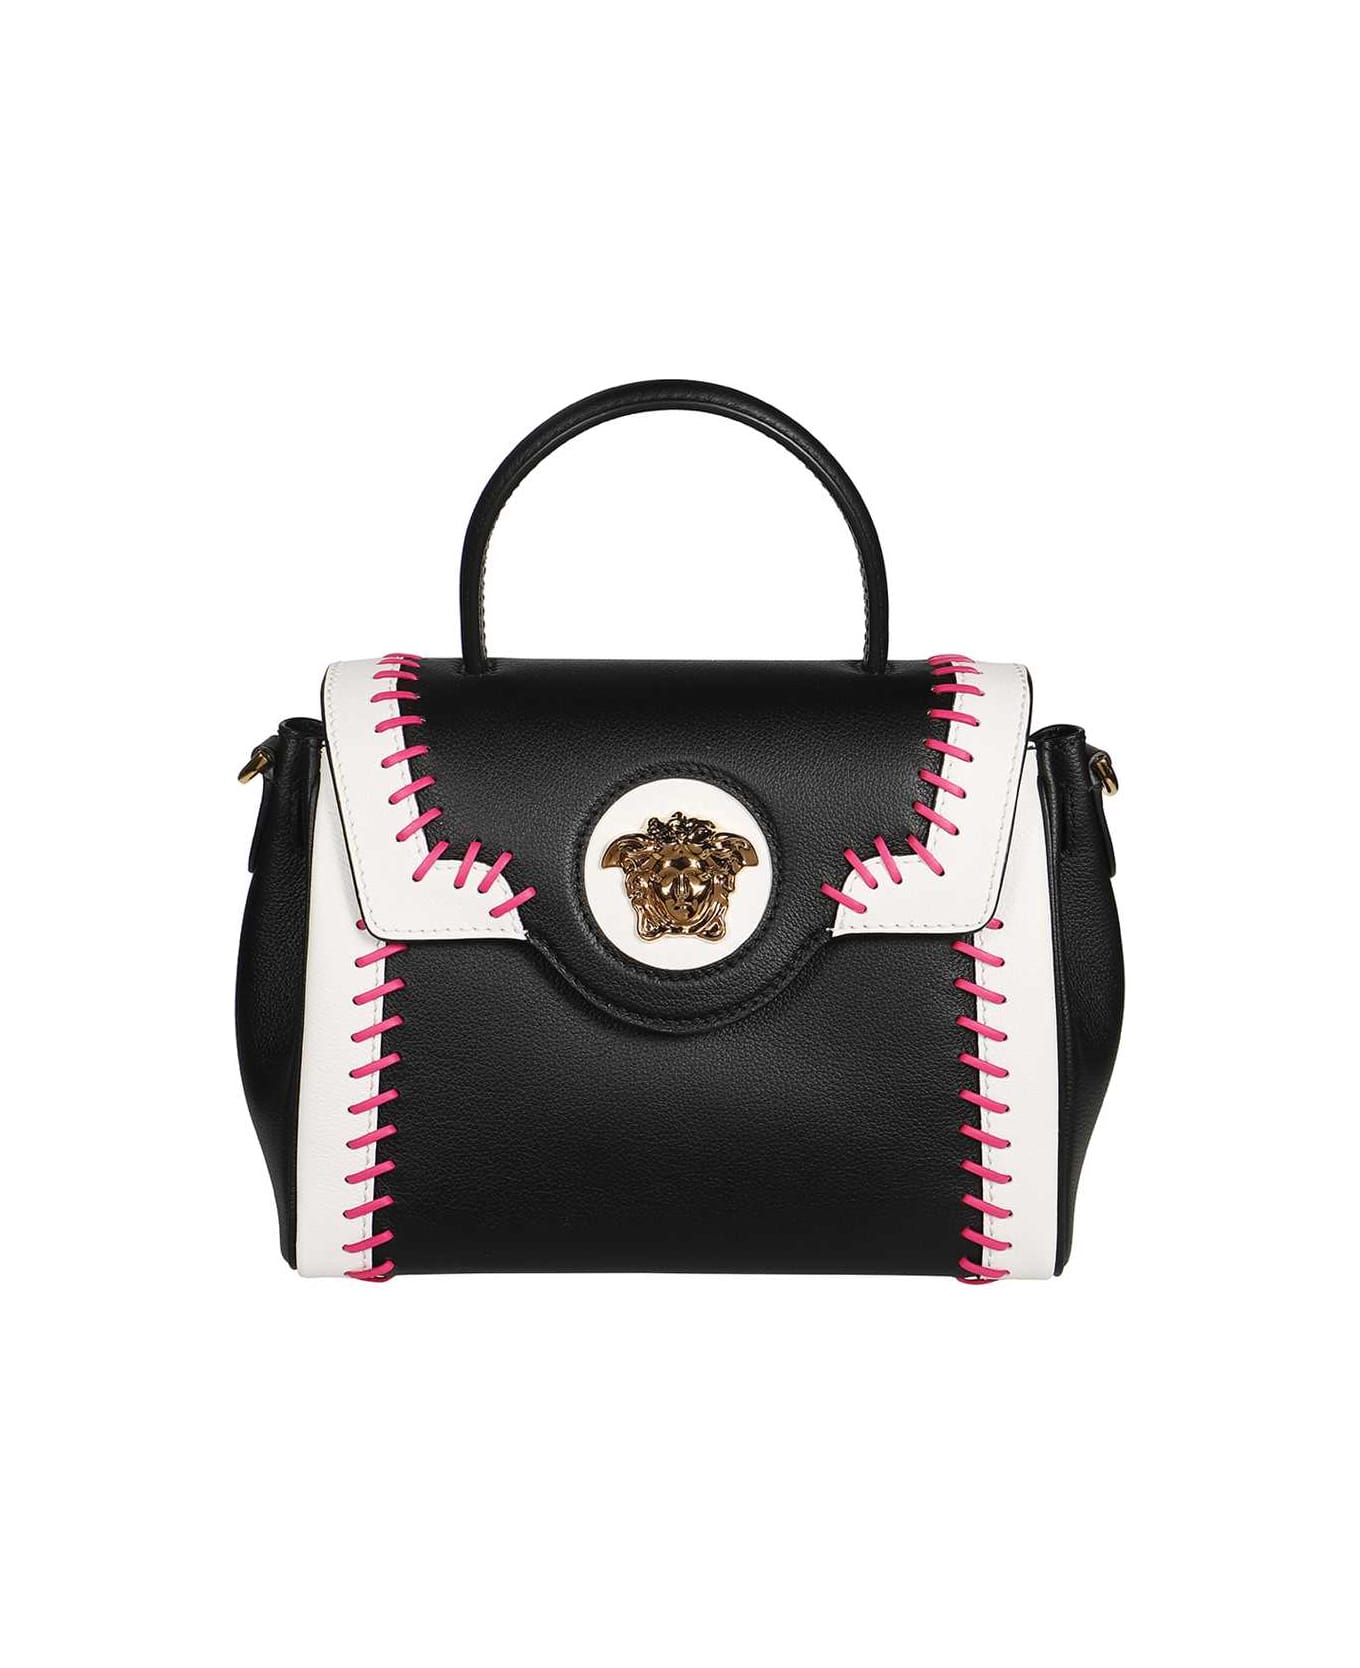 Versace Leather Tote - black